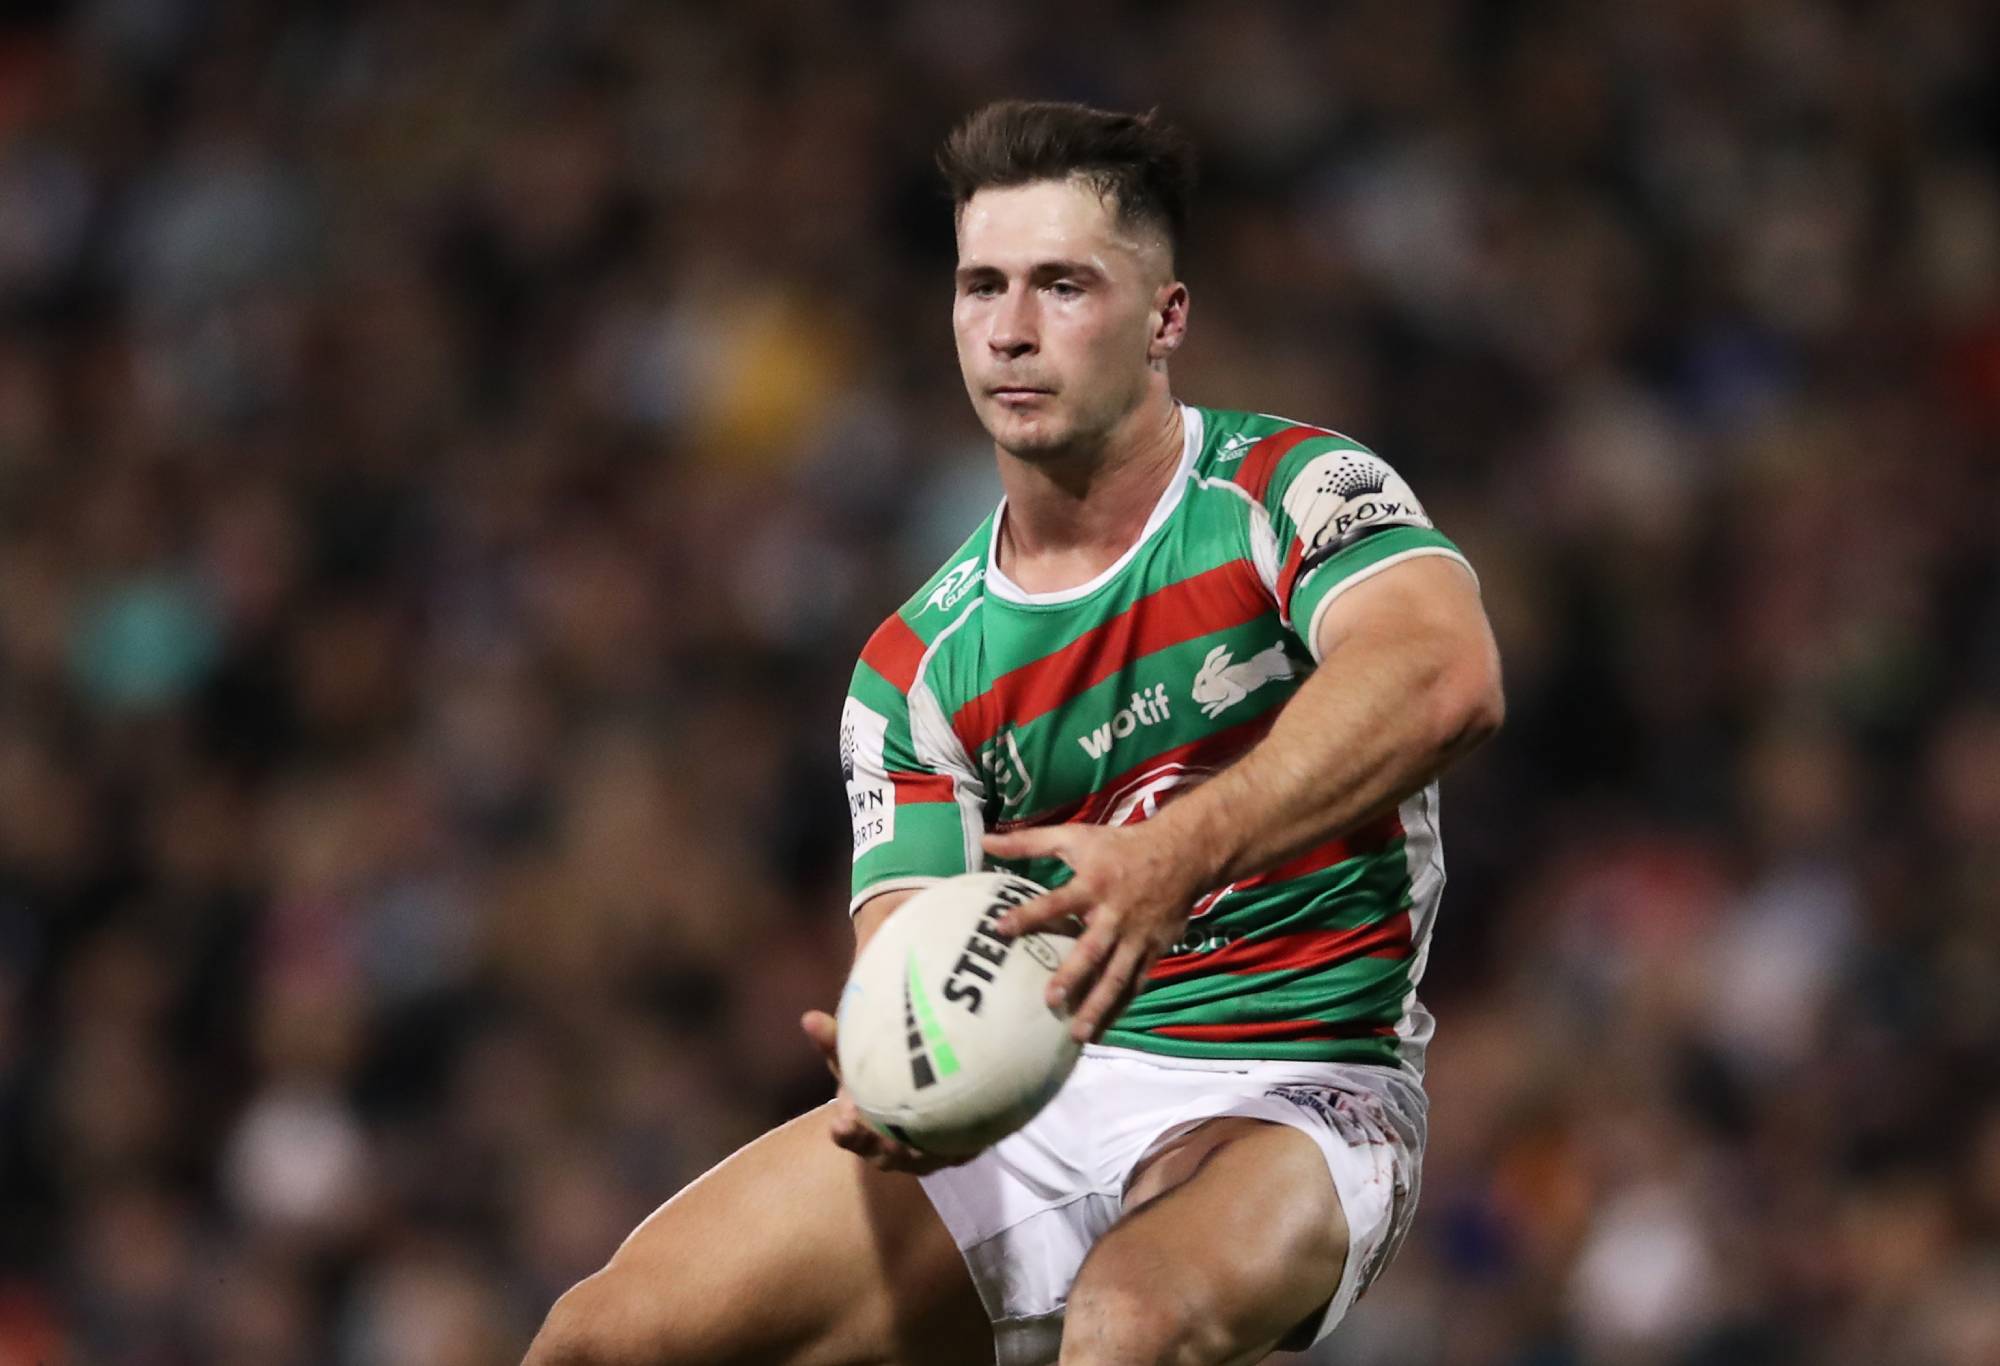 PENRITH, AUSTRALIA - APRIL 1: Lachlan Ilias of the Rabbitohs passes during the NRL Fourth Round game between the Penrith Panthers and the South Sydney Rabbitohs at BlueBet Stadium on April 1, 2022 in Penrith, Australia.  (Photo by Matt King/Getty Images)